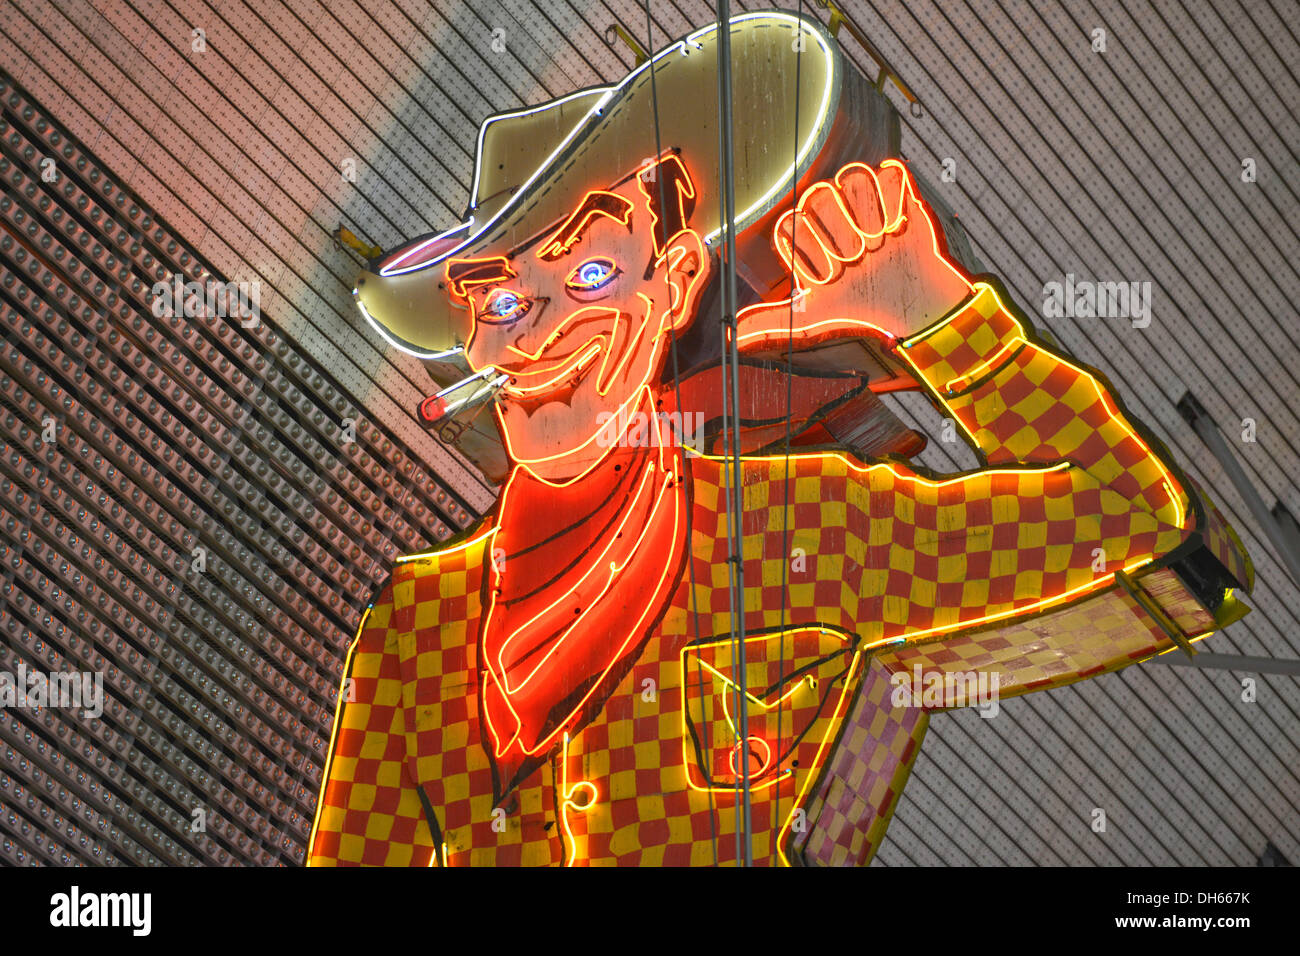 Vegas Vic, famous cowboy figure and landmark, neon sign in old Las Vegas, Pioneer Casino Hotel, Fremont Street Experience Stock Photo